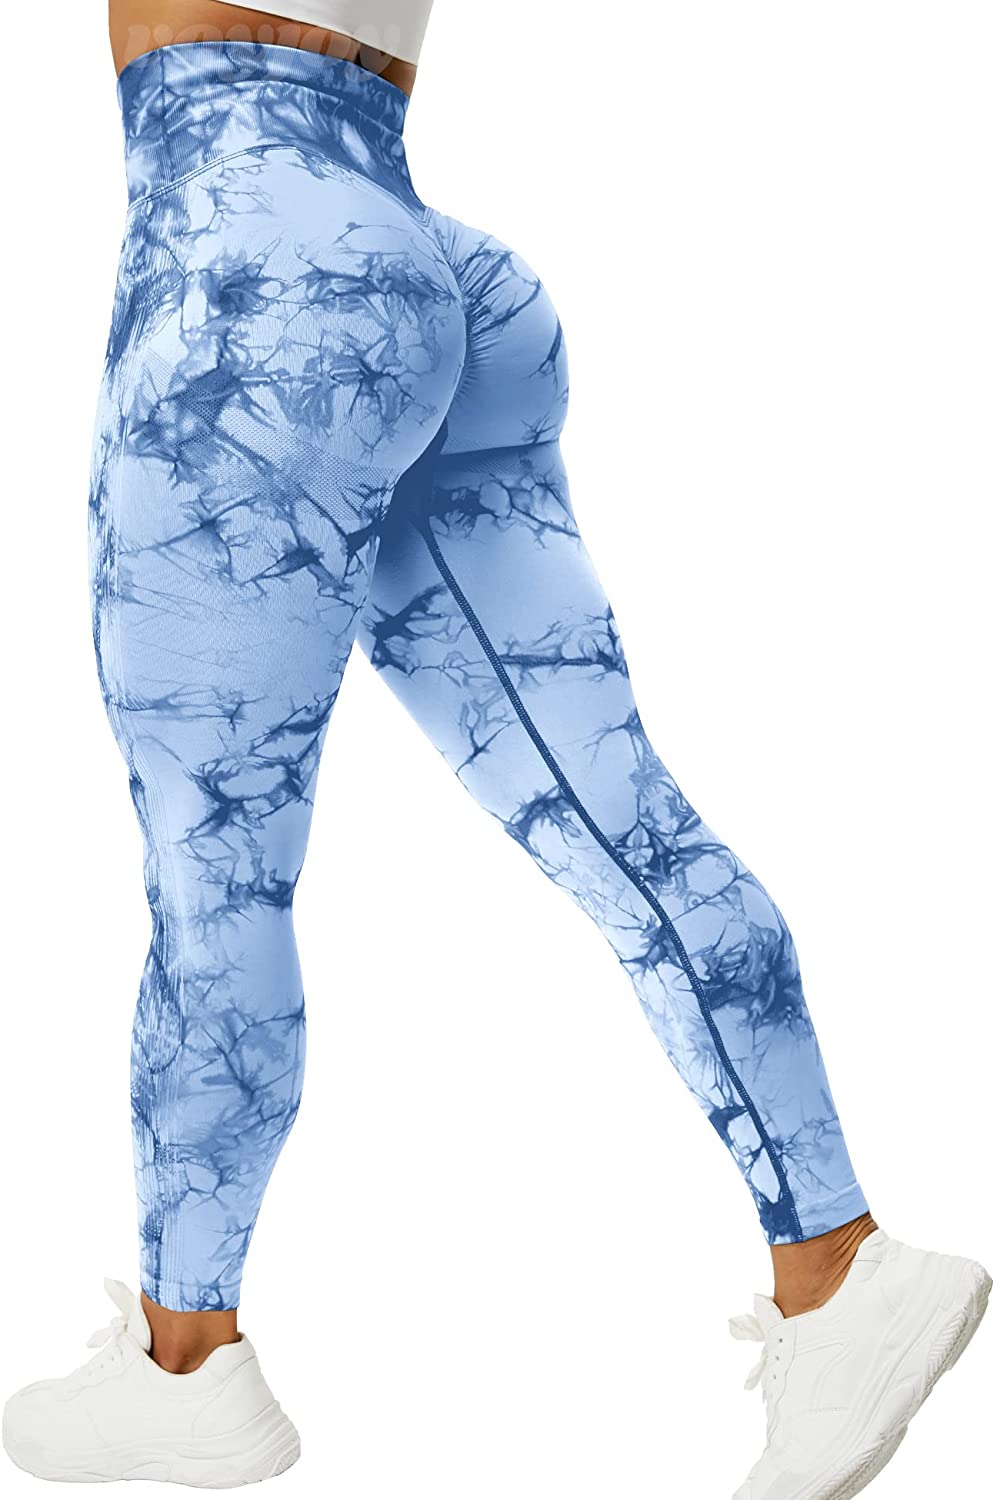 QAFOPEH Women Tie-Dyed High Waisted Yoga Pants Stretchy Solid Legging 